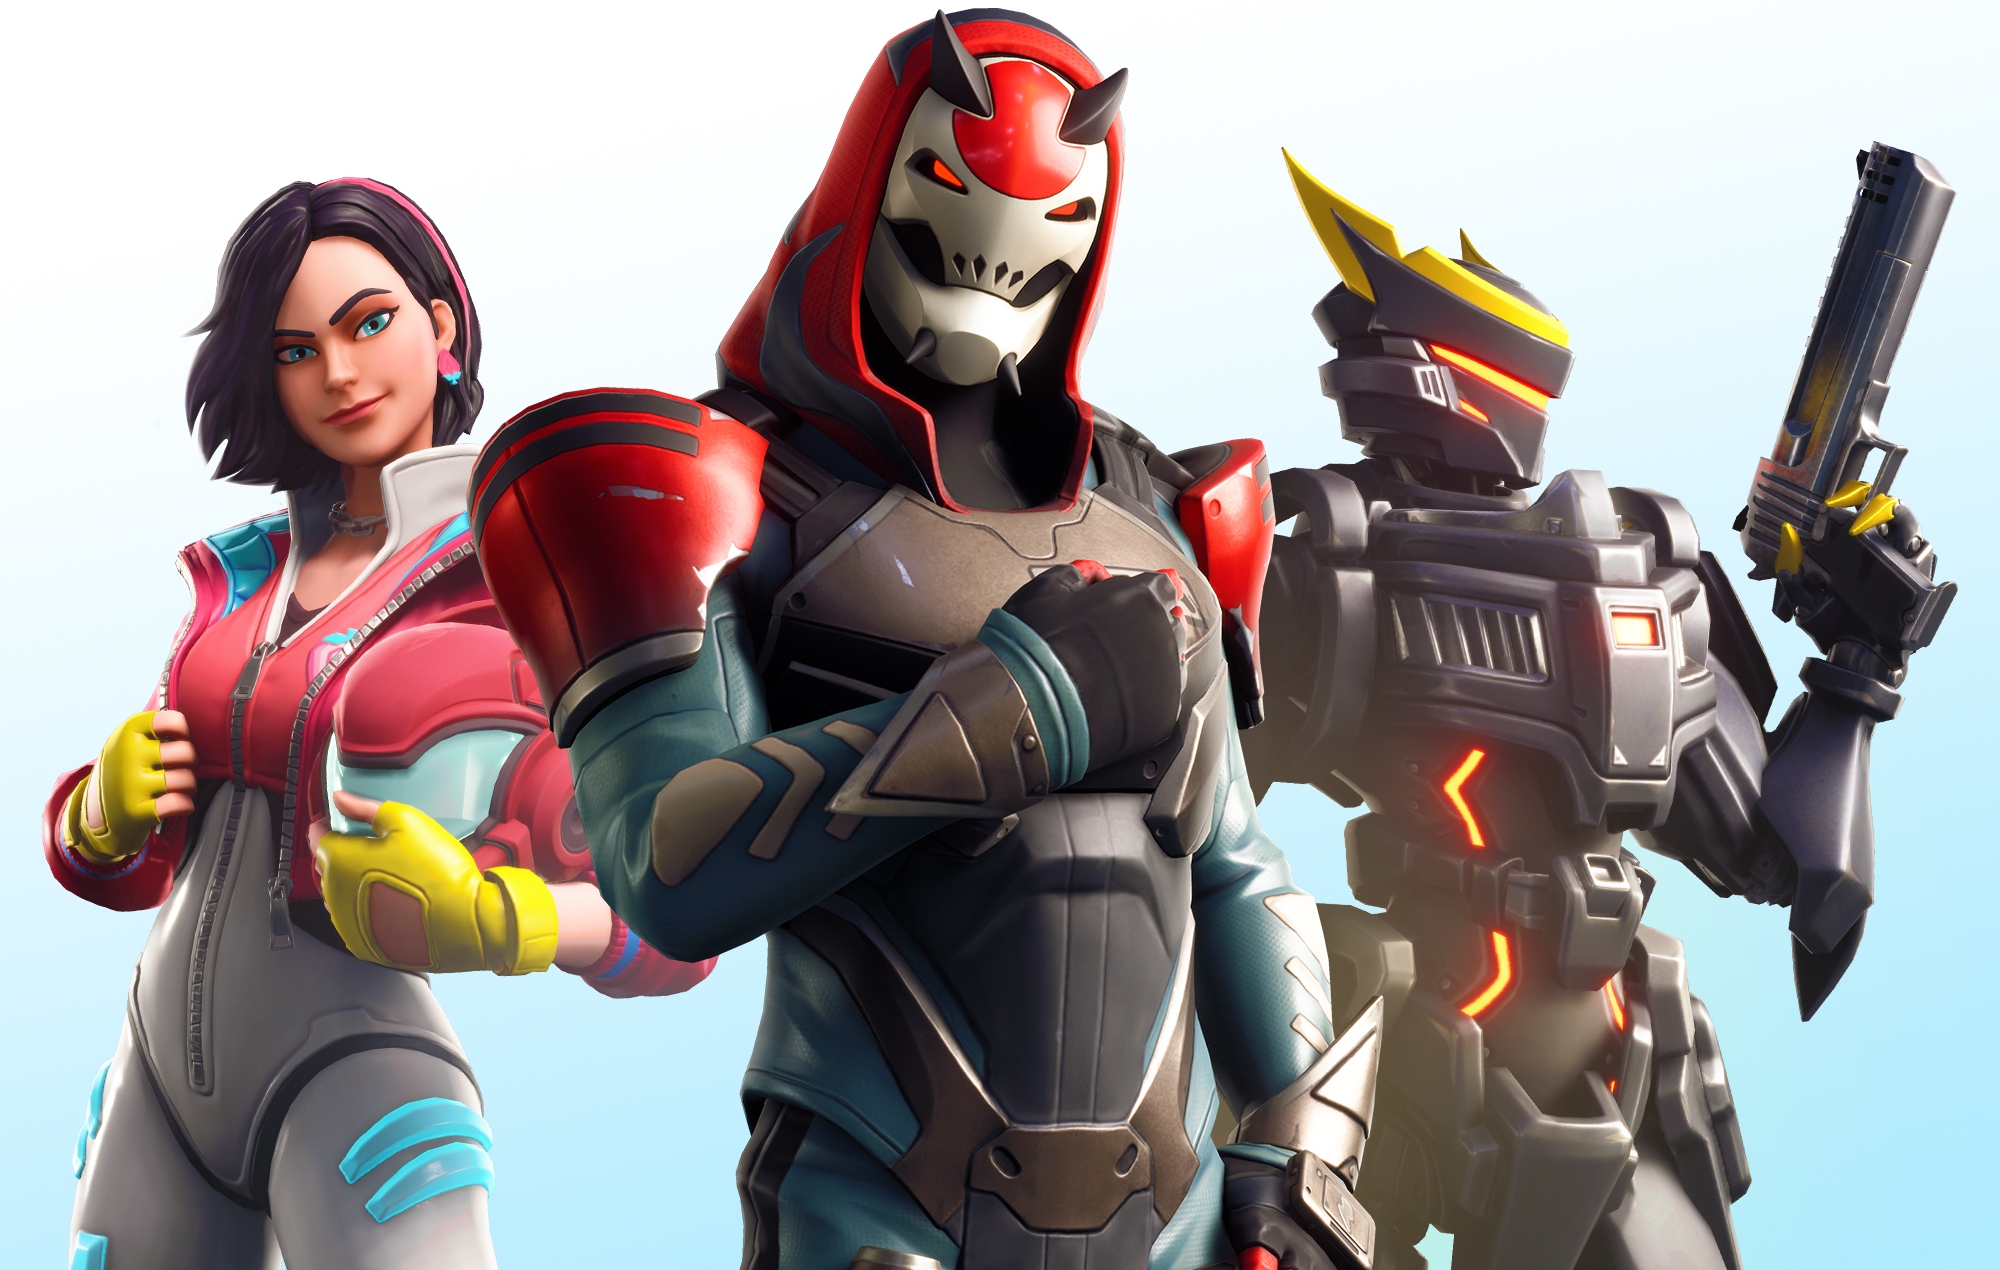 Epic Games is bringing movie night vibes to ‘Fortnite’